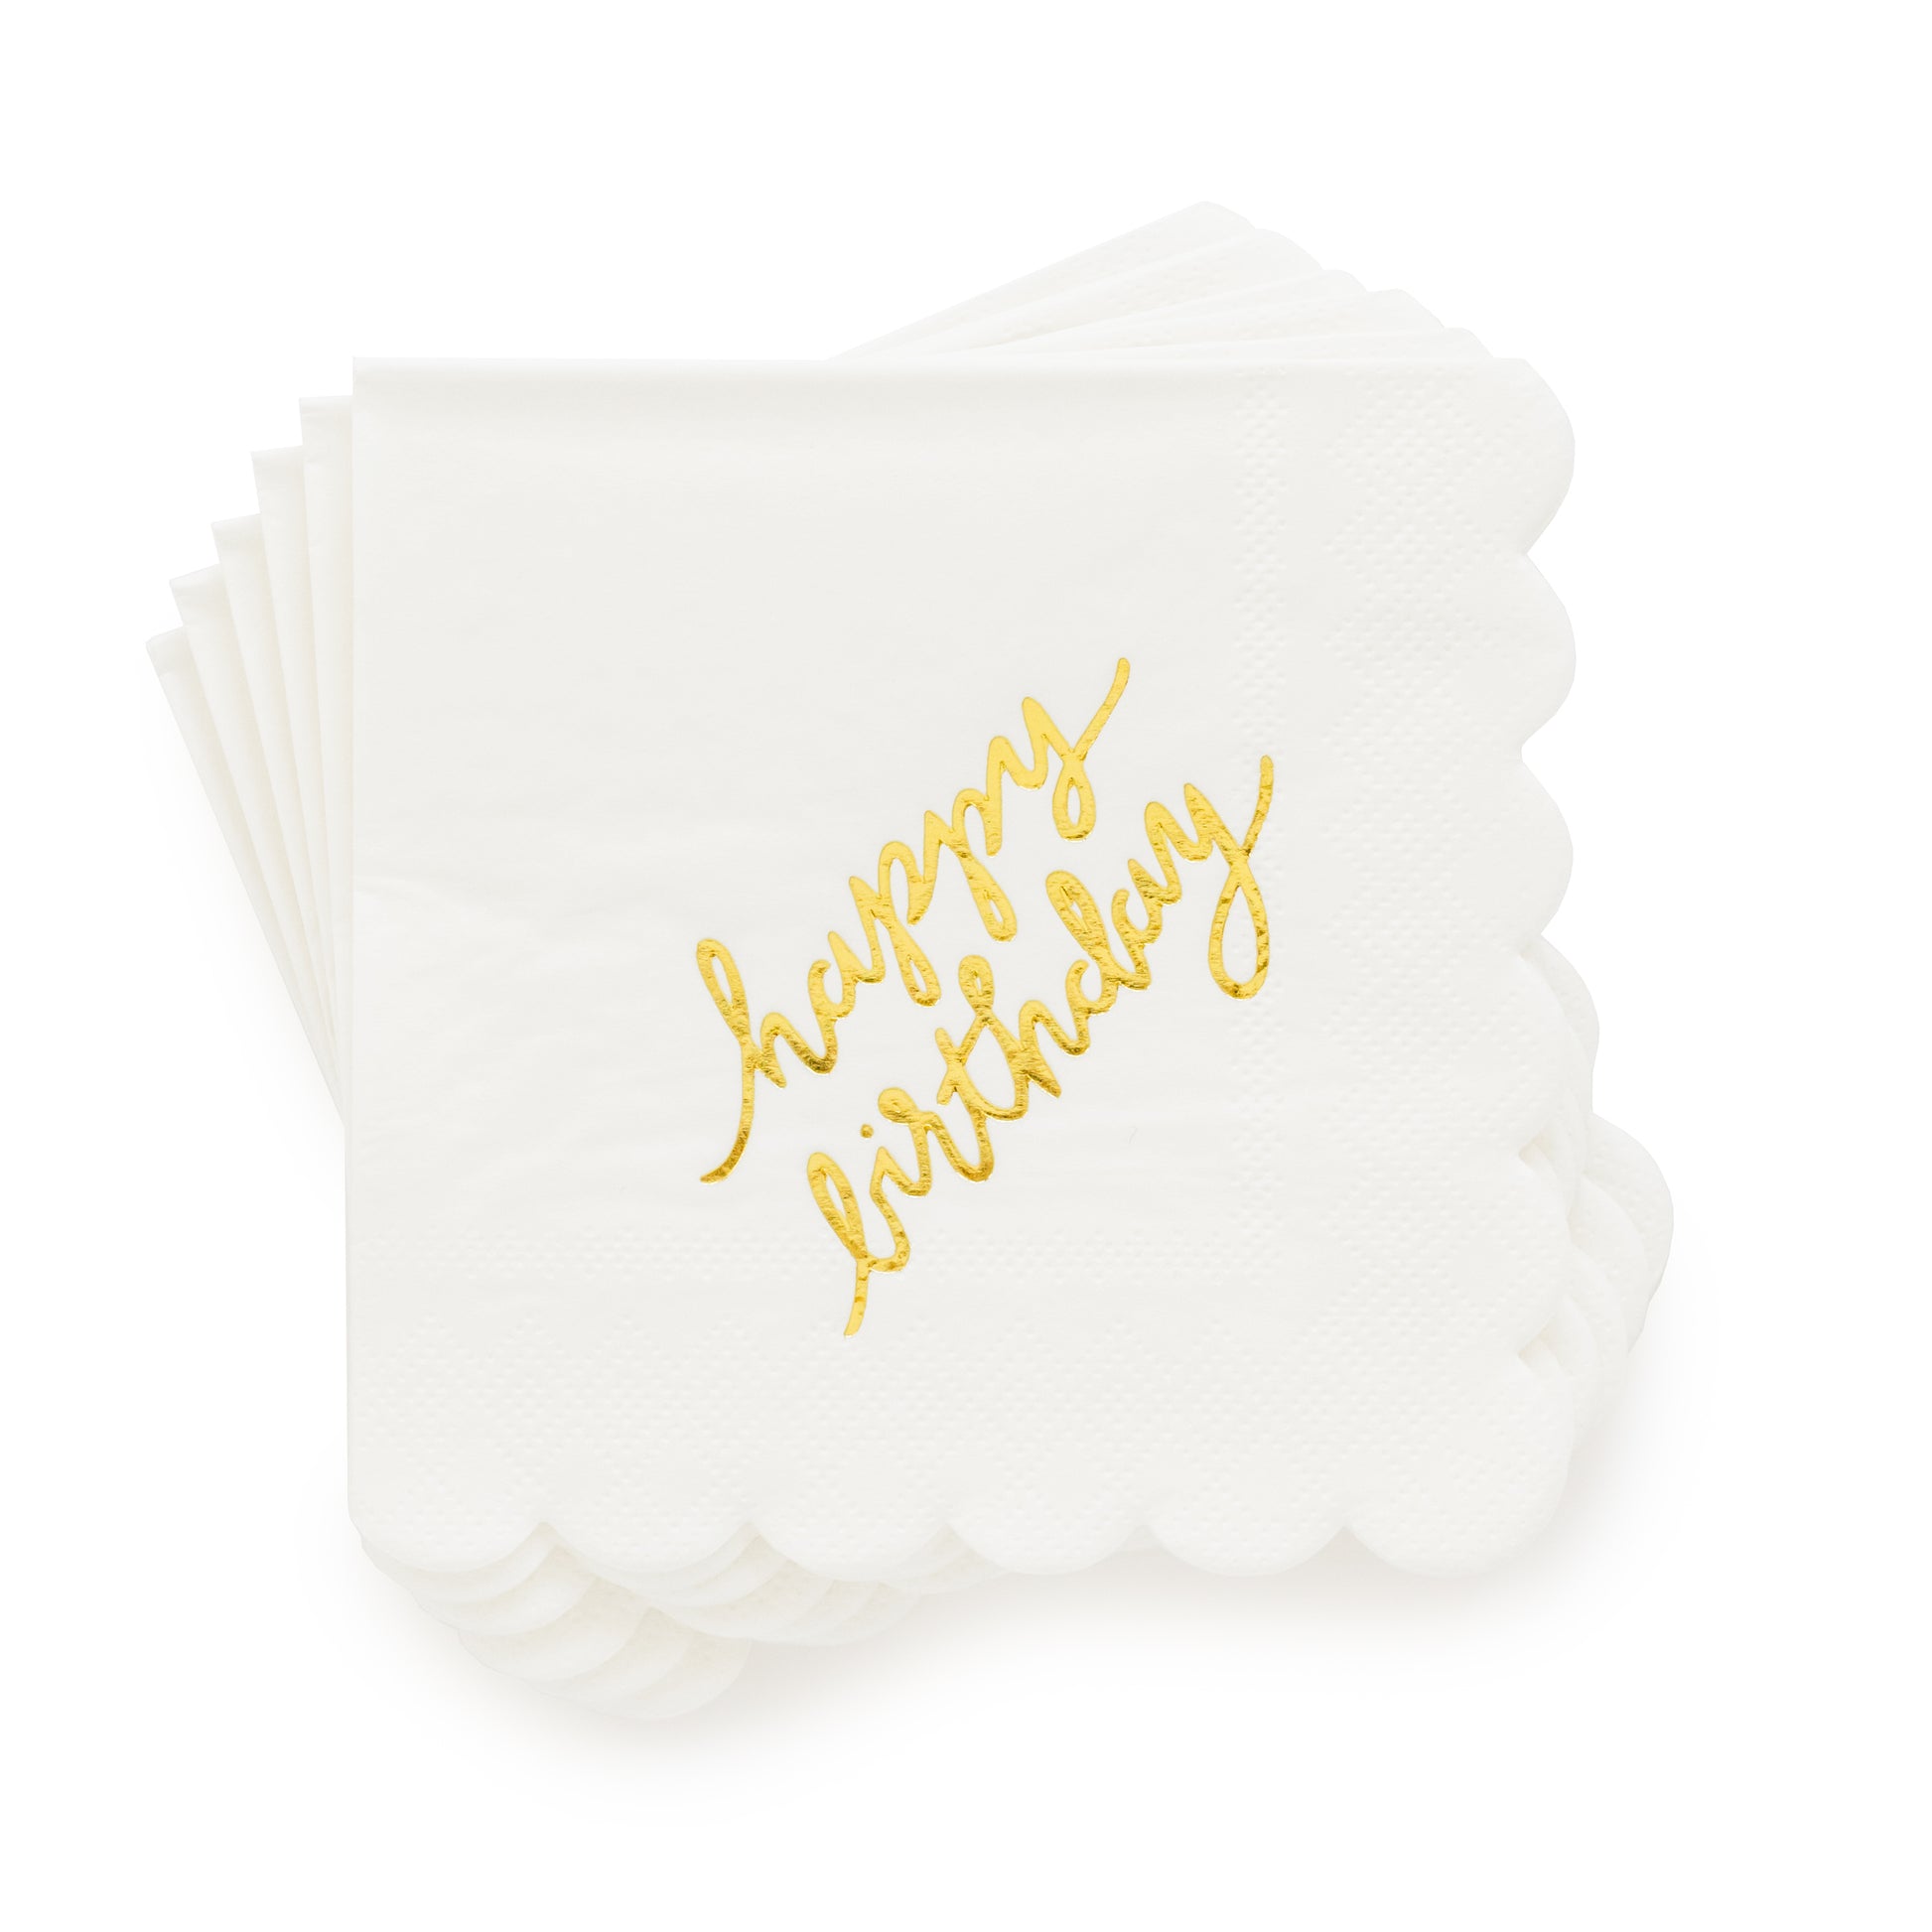 White scalloped paper napkin with gold foil happy birthday